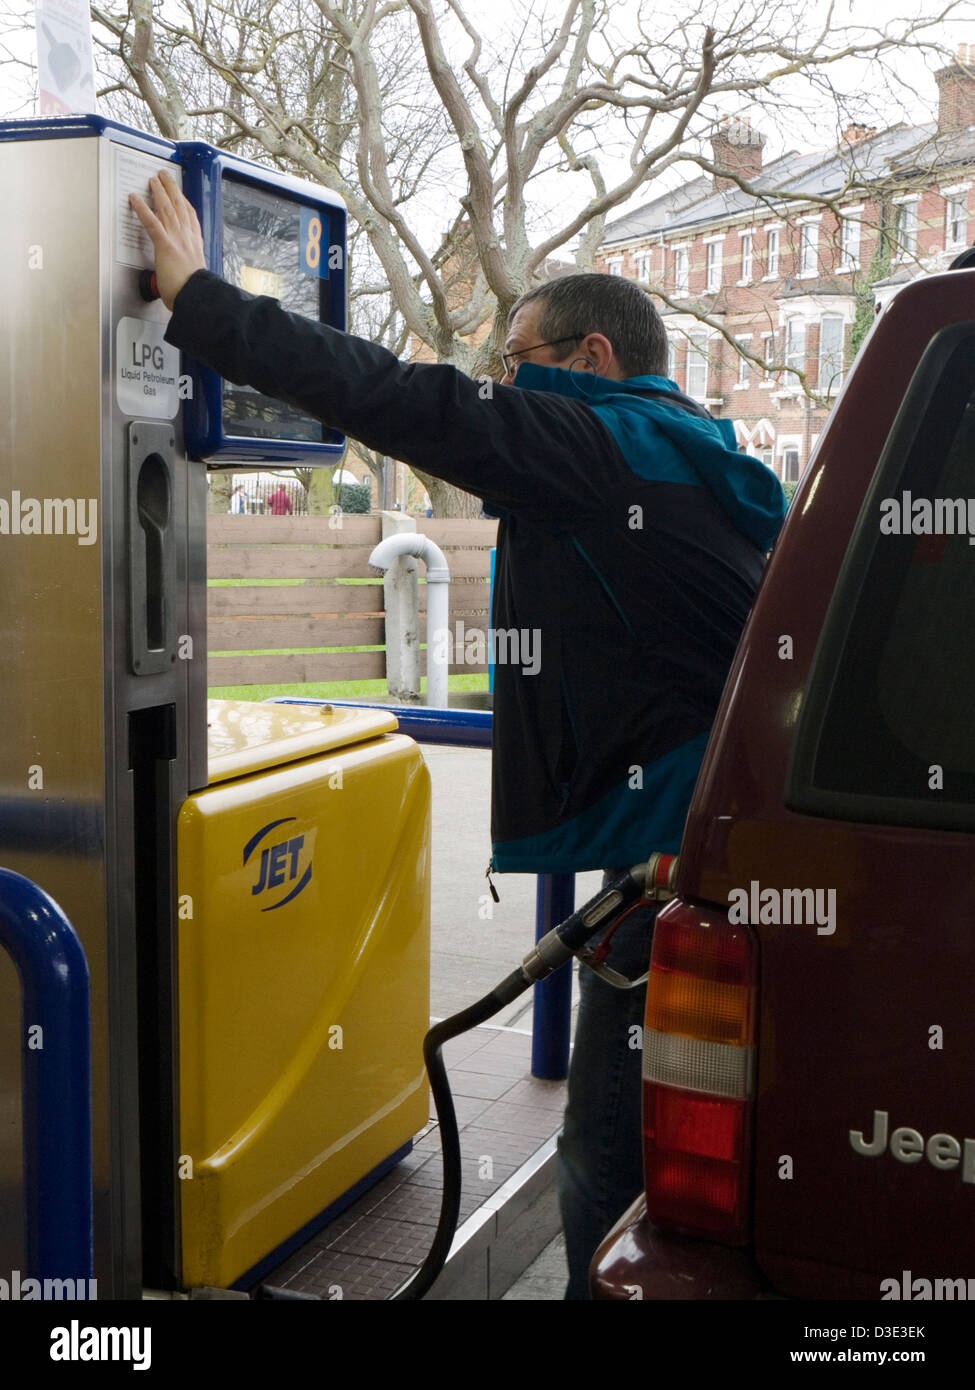 man filling up a car with lpg fuel Stock Photo